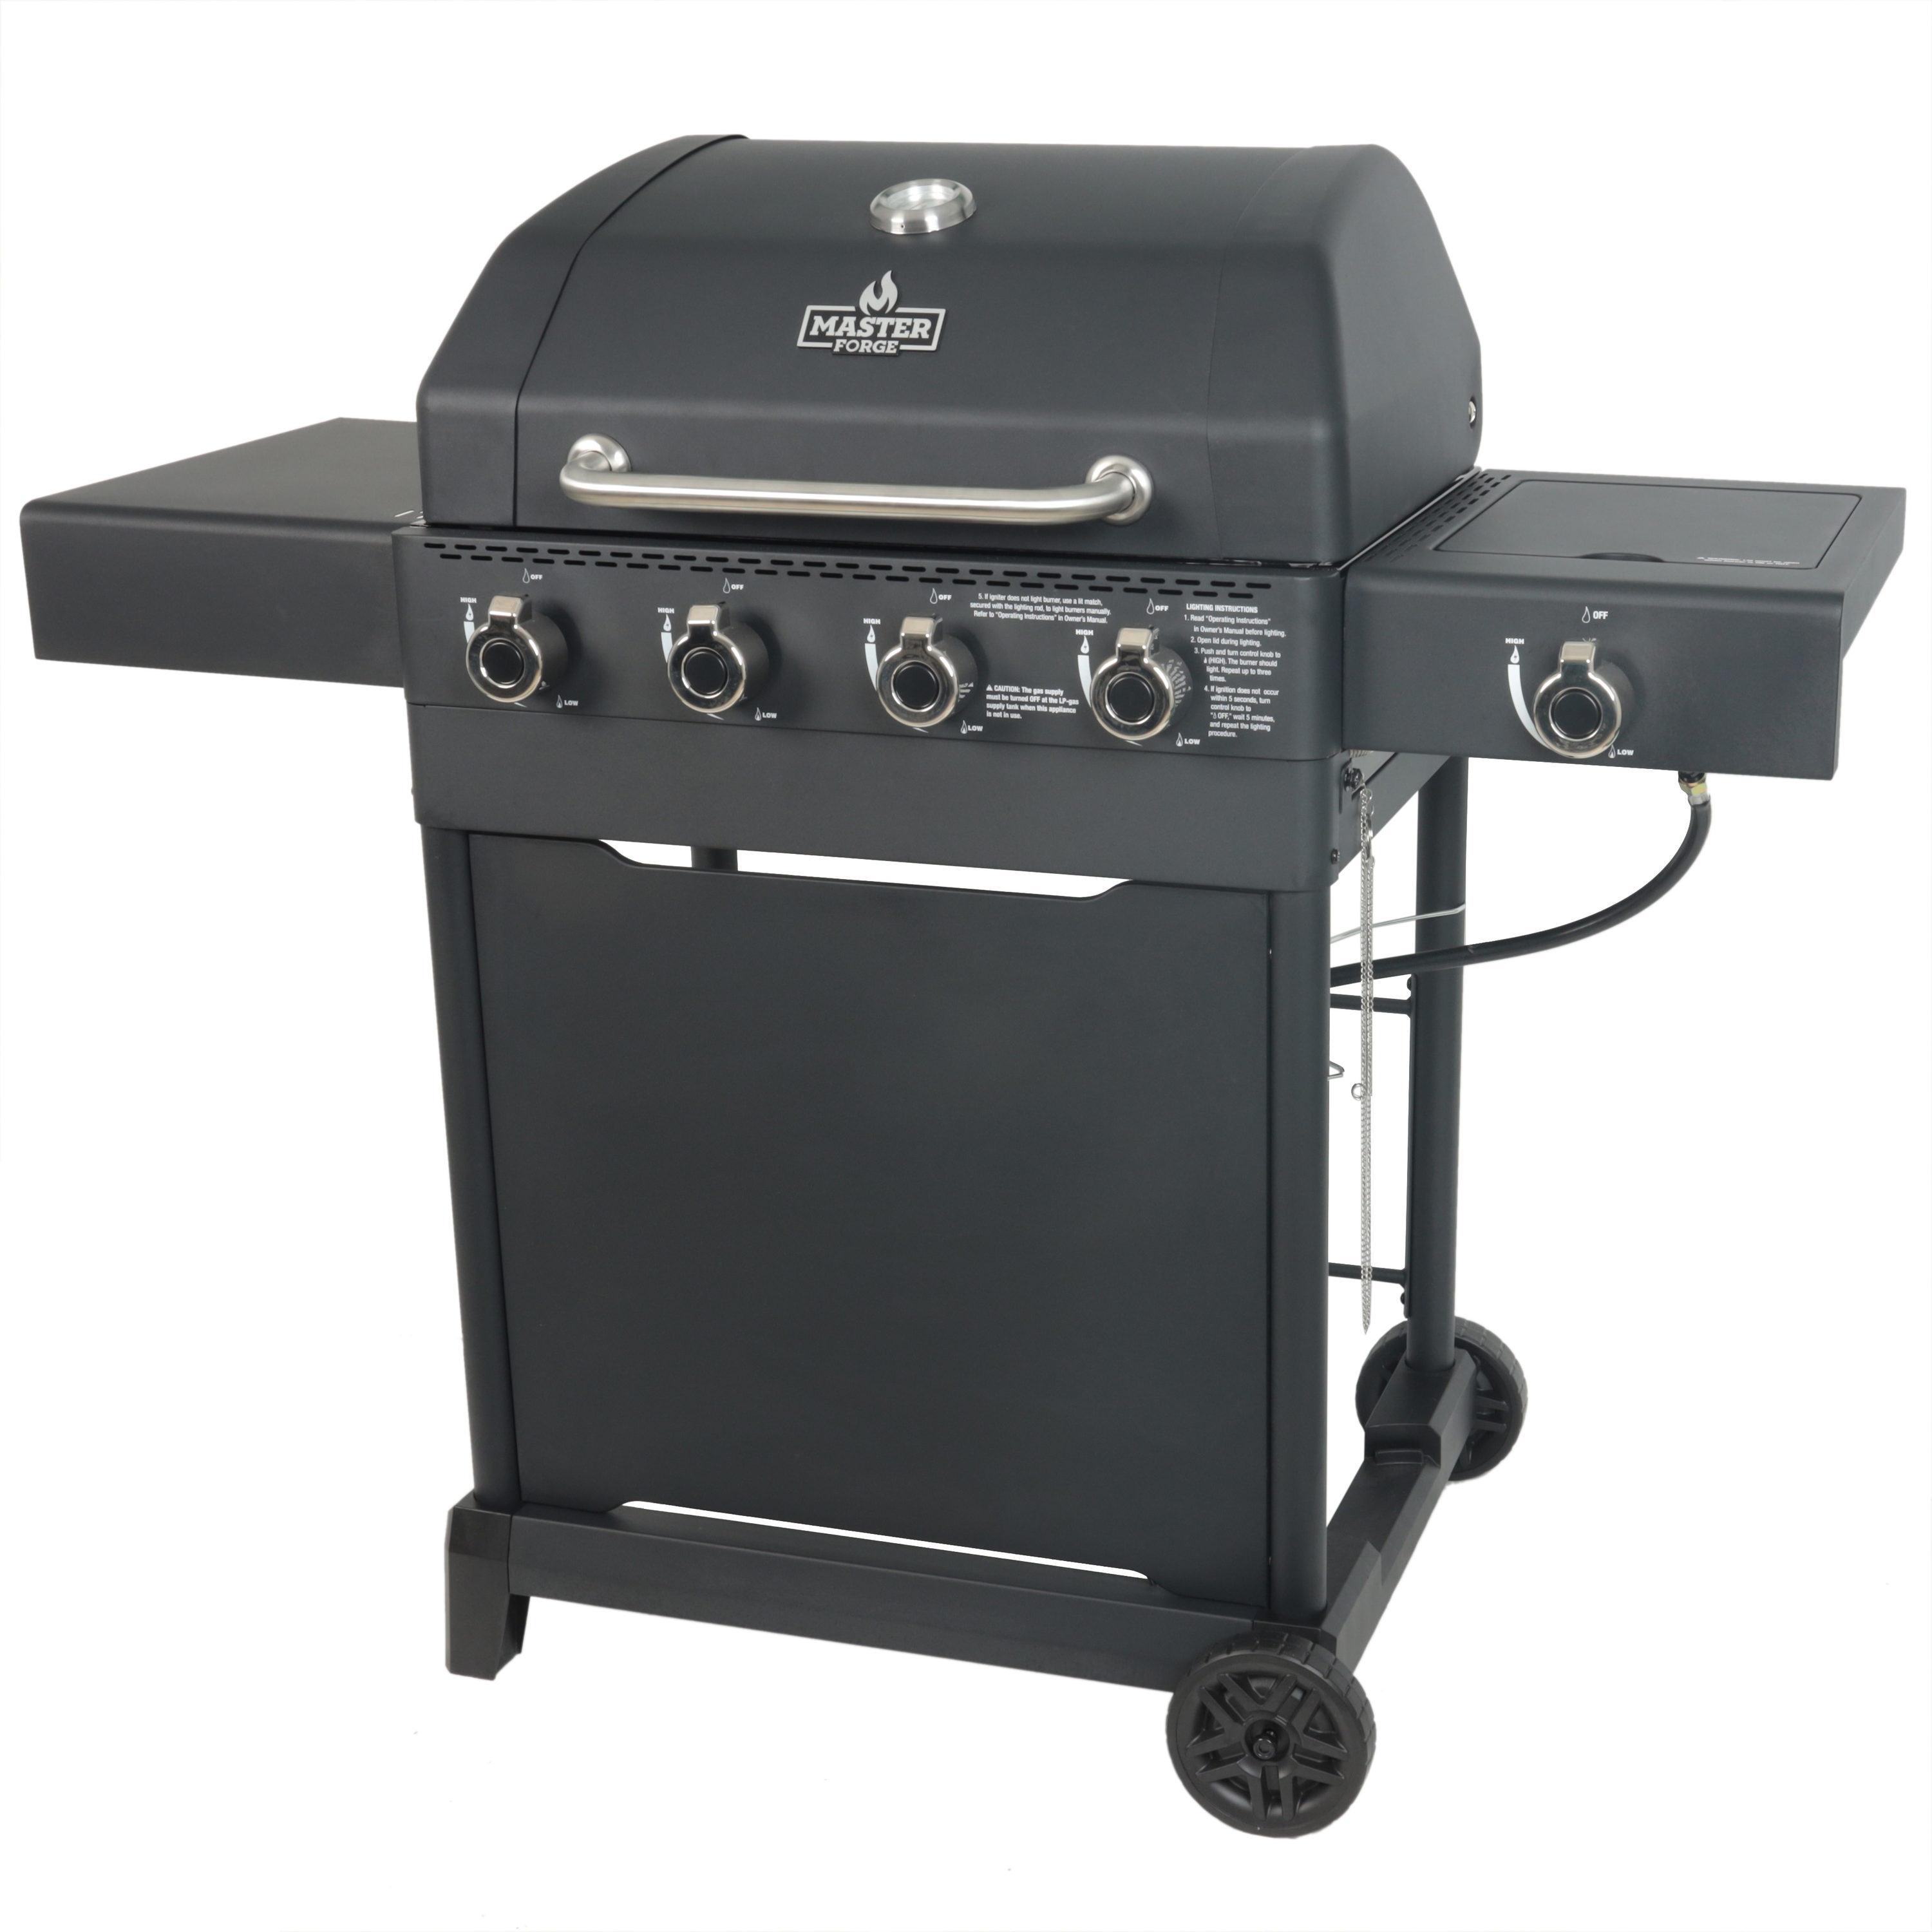 Master Forge Black/Powder Coated 4-Burner Liquid Propane Gas Grill with ...